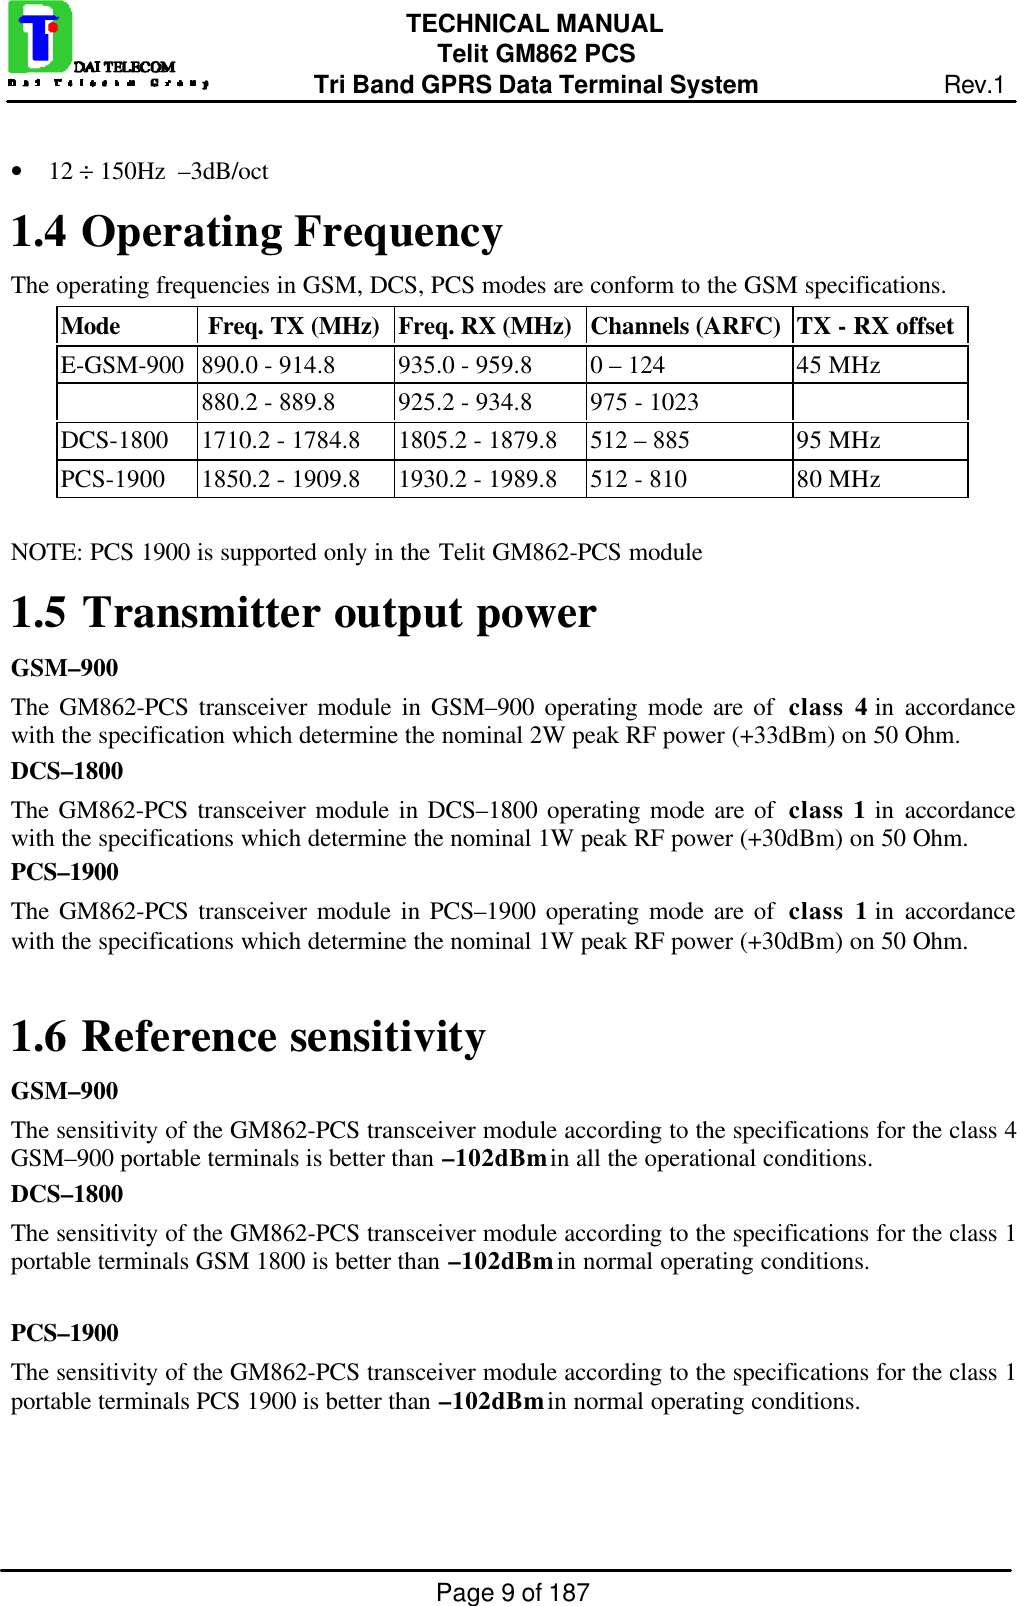 Page 9 of 187TECHNICAL MANUALTelit GM862 PCSTri Band GPRS Data Terminal System Rev.1• 12 ÷ 150Hz  –3dB/oct1.4  Operating FrequencyThe operating frequencies in GSM, DCS, PCS modes are conform to the GSM specifications.Mode  Freq. TX (MHz) Freq. RX (MHz) Channels (ARFC) TX - RX offsetE-GSM-900 890.0 - 914.8 935.0 - 959.8 0 – 124 45 MHz880.2 - 889.8 925.2 - 934.8 975 - 1023DCS-1800 1710.2 - 1784.8 1805.2 - 1879.8 512 – 885 95 MHzPCS-1900 1850.2 - 1909.8 1930.2 - 1989.8 512 - 810 80 MHzNOTE: PCS 1900 is supported only in the Telit GM862-PCS module1.5  Transmitter output powerGSM–900The GM862-PCS transceiver module in GSM–900 operating mode are of  class 4 in accordancewith the specification which determine the nominal 2W peak RF power (+33dBm) on 50 Ohm.DCS–1800The GM862-PCS transceiver module in DCS–1800 operating mode are of  class 1 in accordancewith the specifications which determine the nominal 1W peak RF power (+30dBm) on 50 Ohm.PCS–1900The GM862-PCS transceiver module in PCS–1900 operating mode are of  class 1 in accordancewith the specifications which determine the nominal 1W peak RF power (+30dBm) on 50 Ohm.1.6  Reference sensitivityGSM–900The sensitivity of the GM862-PCS transceiver module according to the specifications for the class 4GSM–900 portable terminals is better than –102dBm in all the operational conditions.DCS–1800The sensitivity of the GM862-PCS transceiver module according to the specifications for the class 1portable terminals GSM 1800 is better than –102dBm in normal operating conditions.PCS–1900The sensitivity of the GM862-PCS transceiver module according to the specifications for the class 1portable terminals PCS 1900 is better than –102dBm in normal operating conditions.